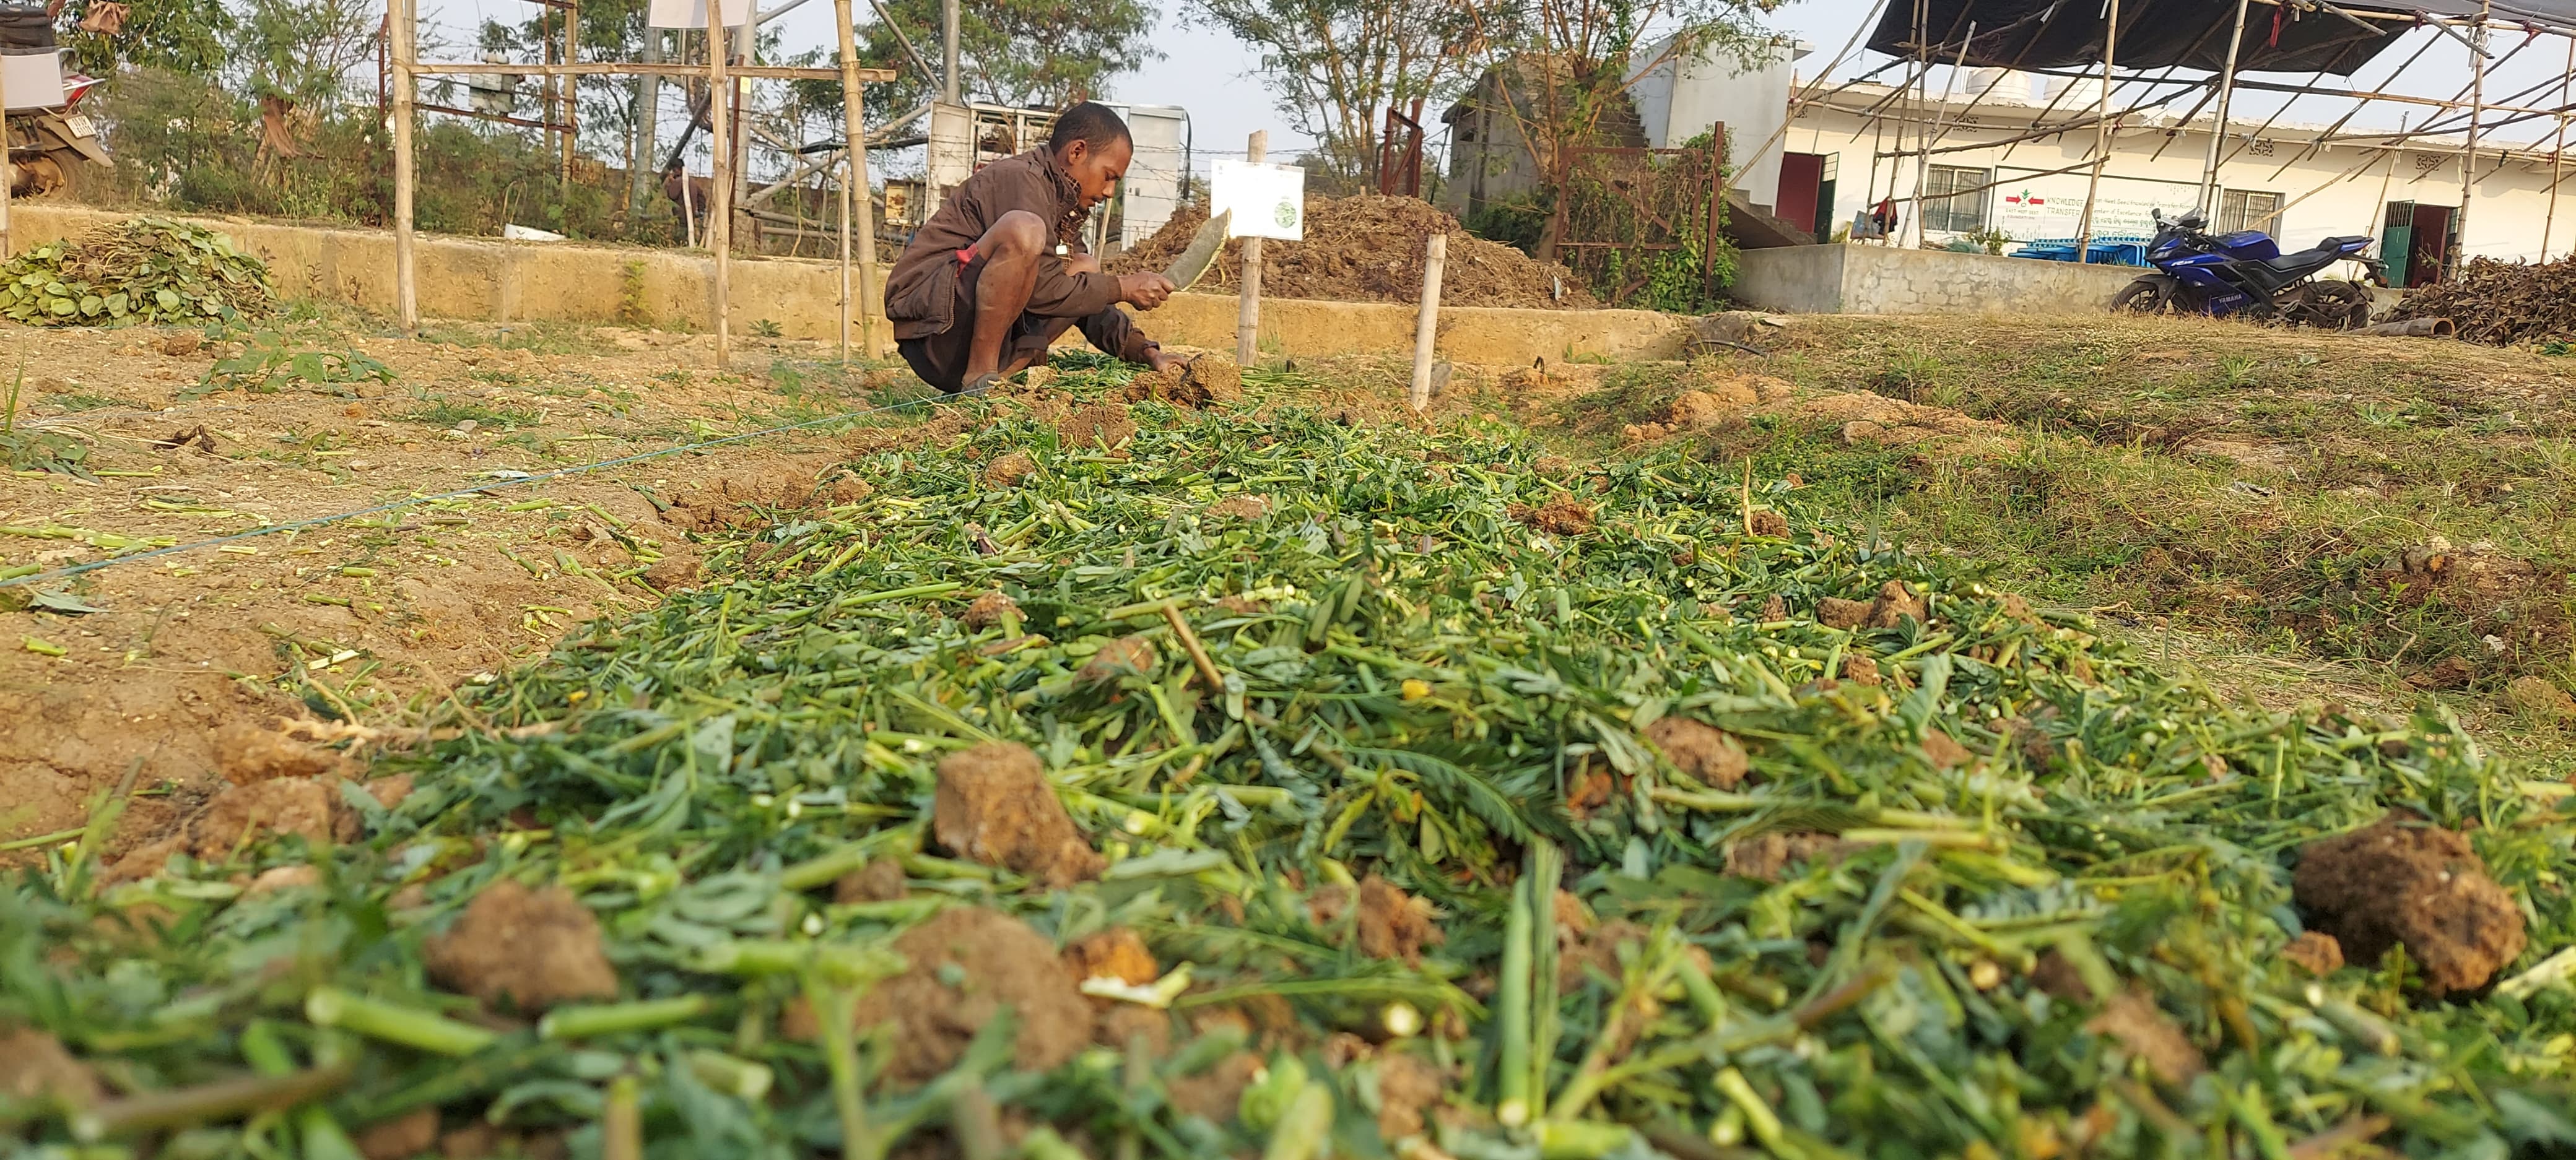 Man chopping green manure plants into small pieces for incorporation into the soil.